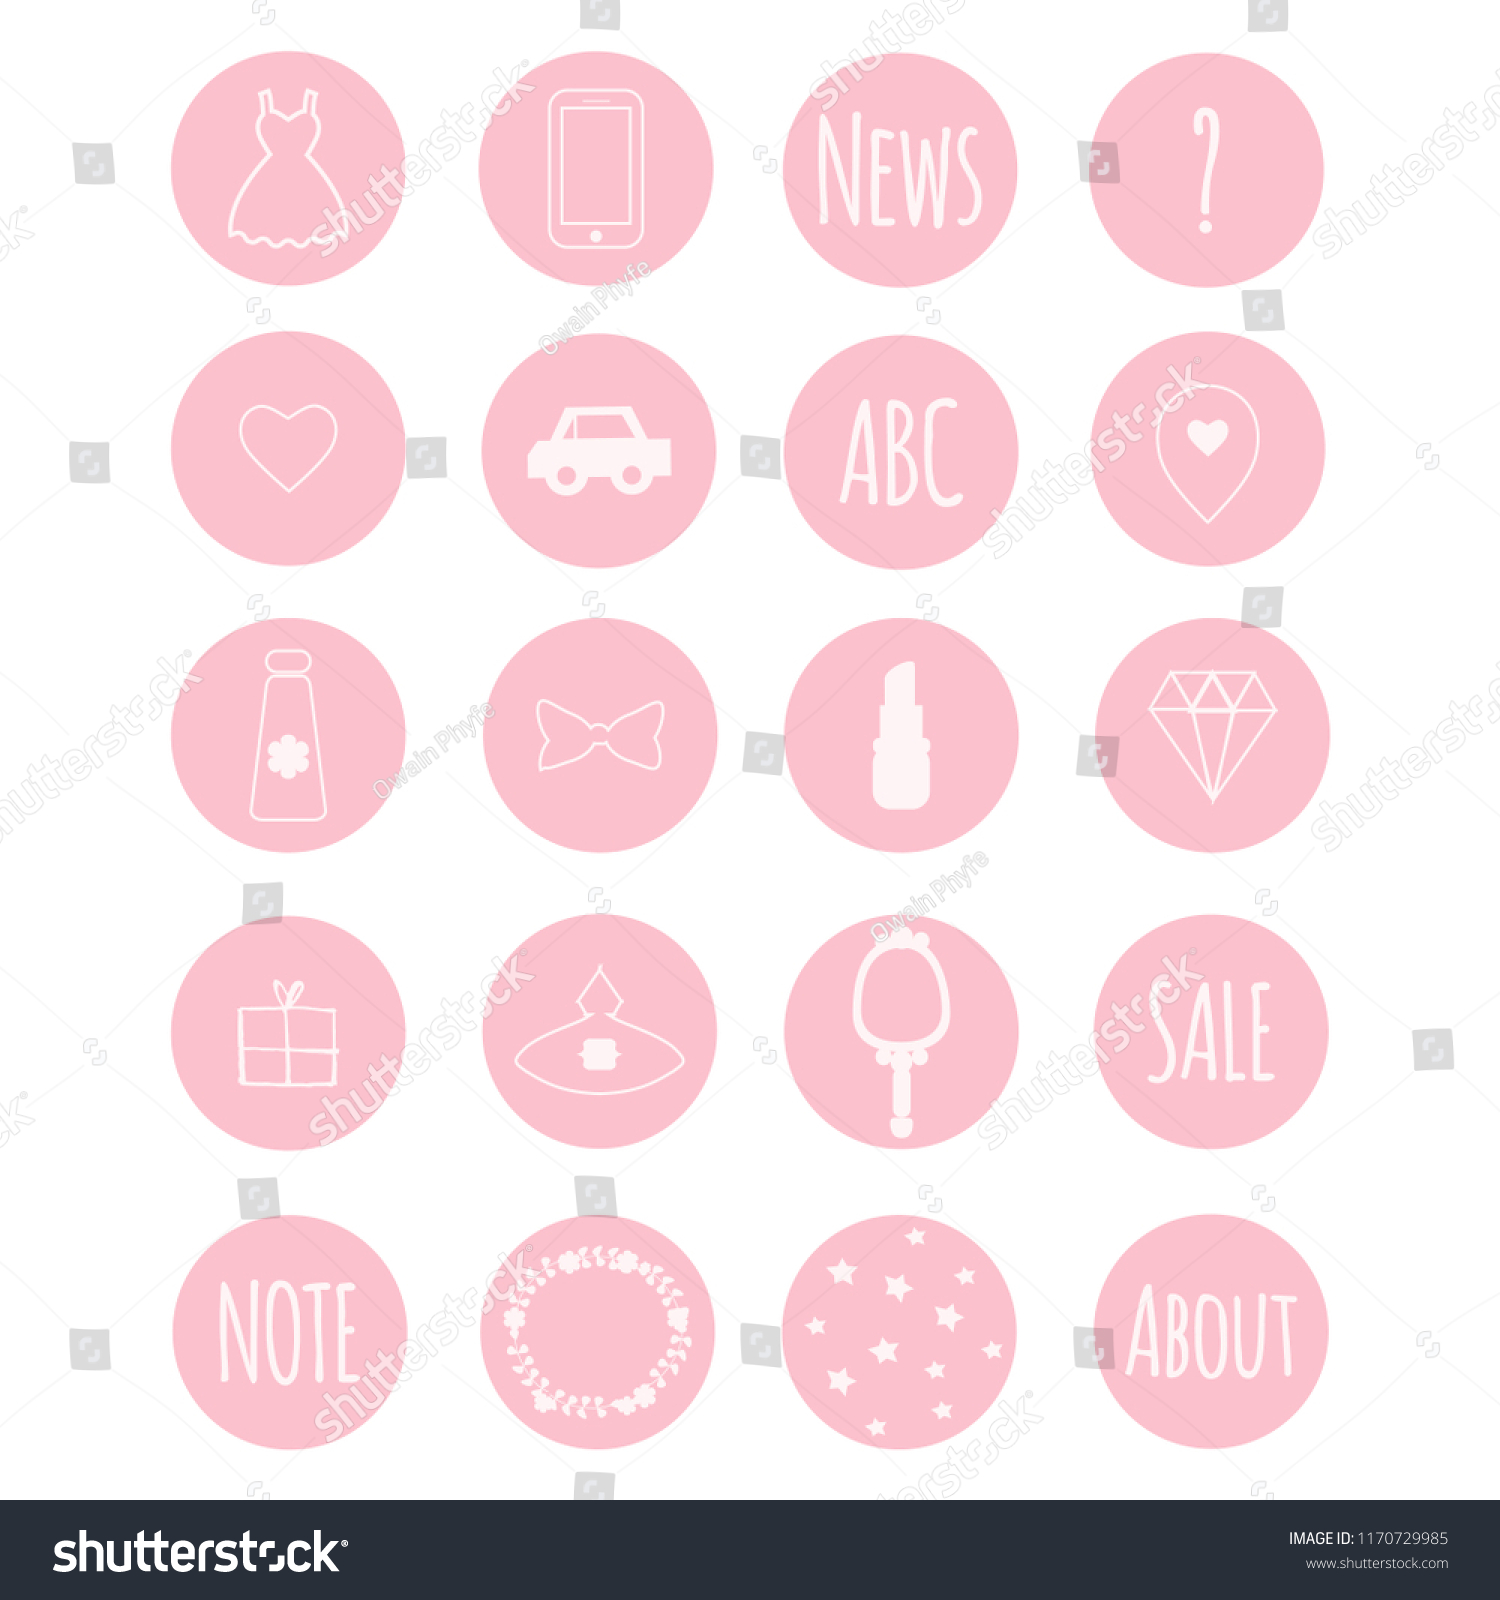 Set of 20 vector icons in nive pink girly theme for web stores, scrapbooking, bullet journals, blogging, etc. #1170729985